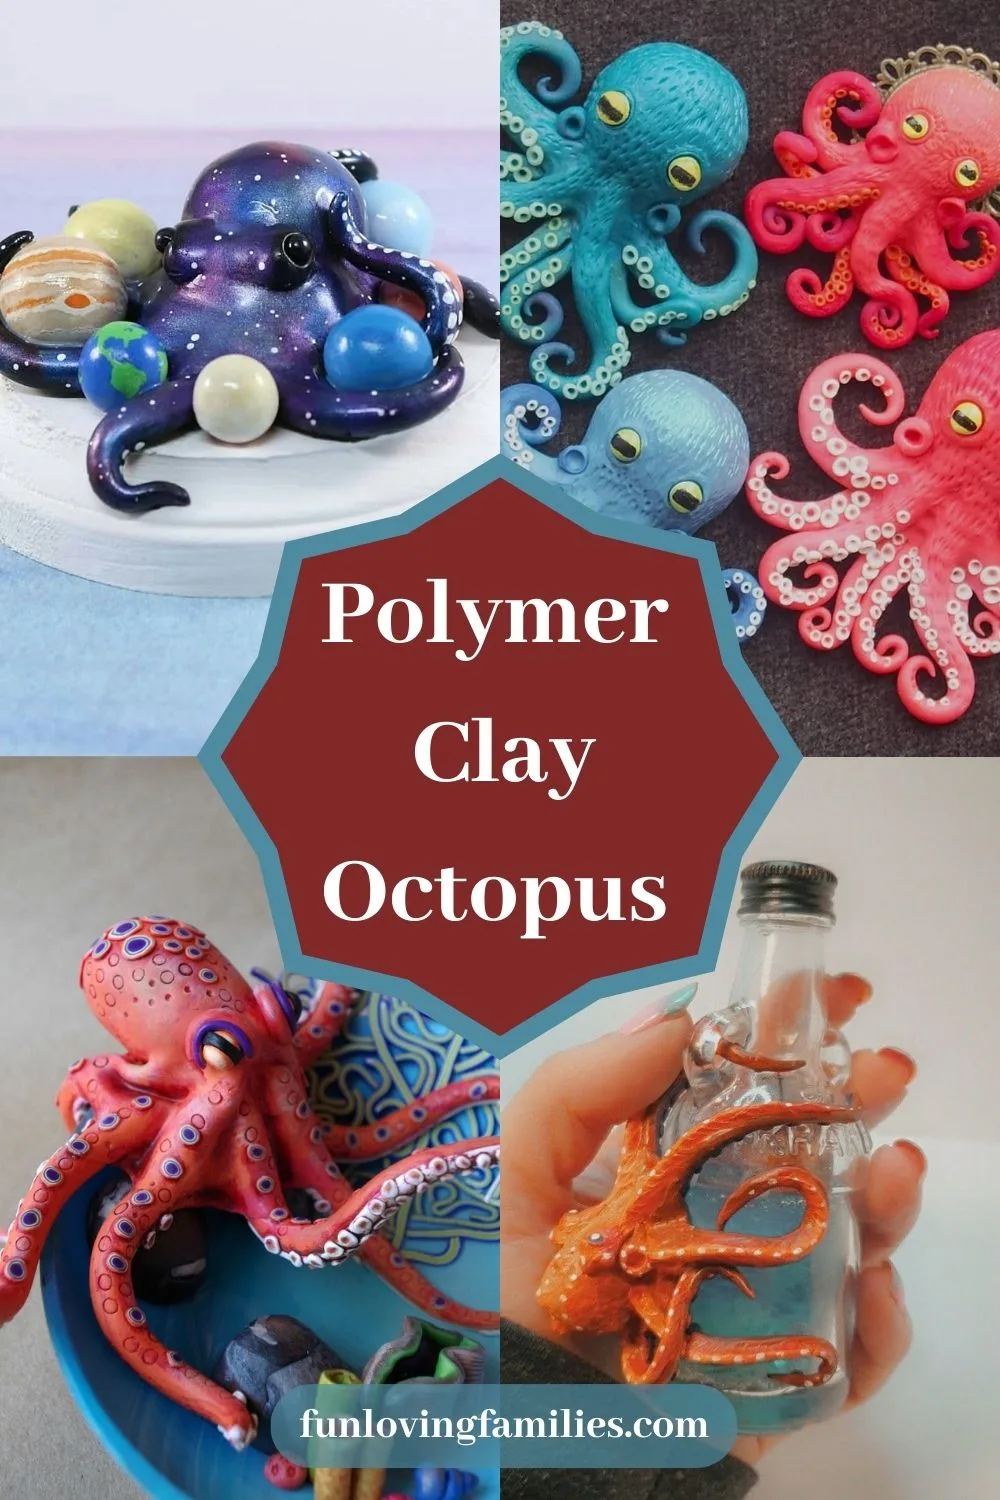 Polymer Clay Octopus